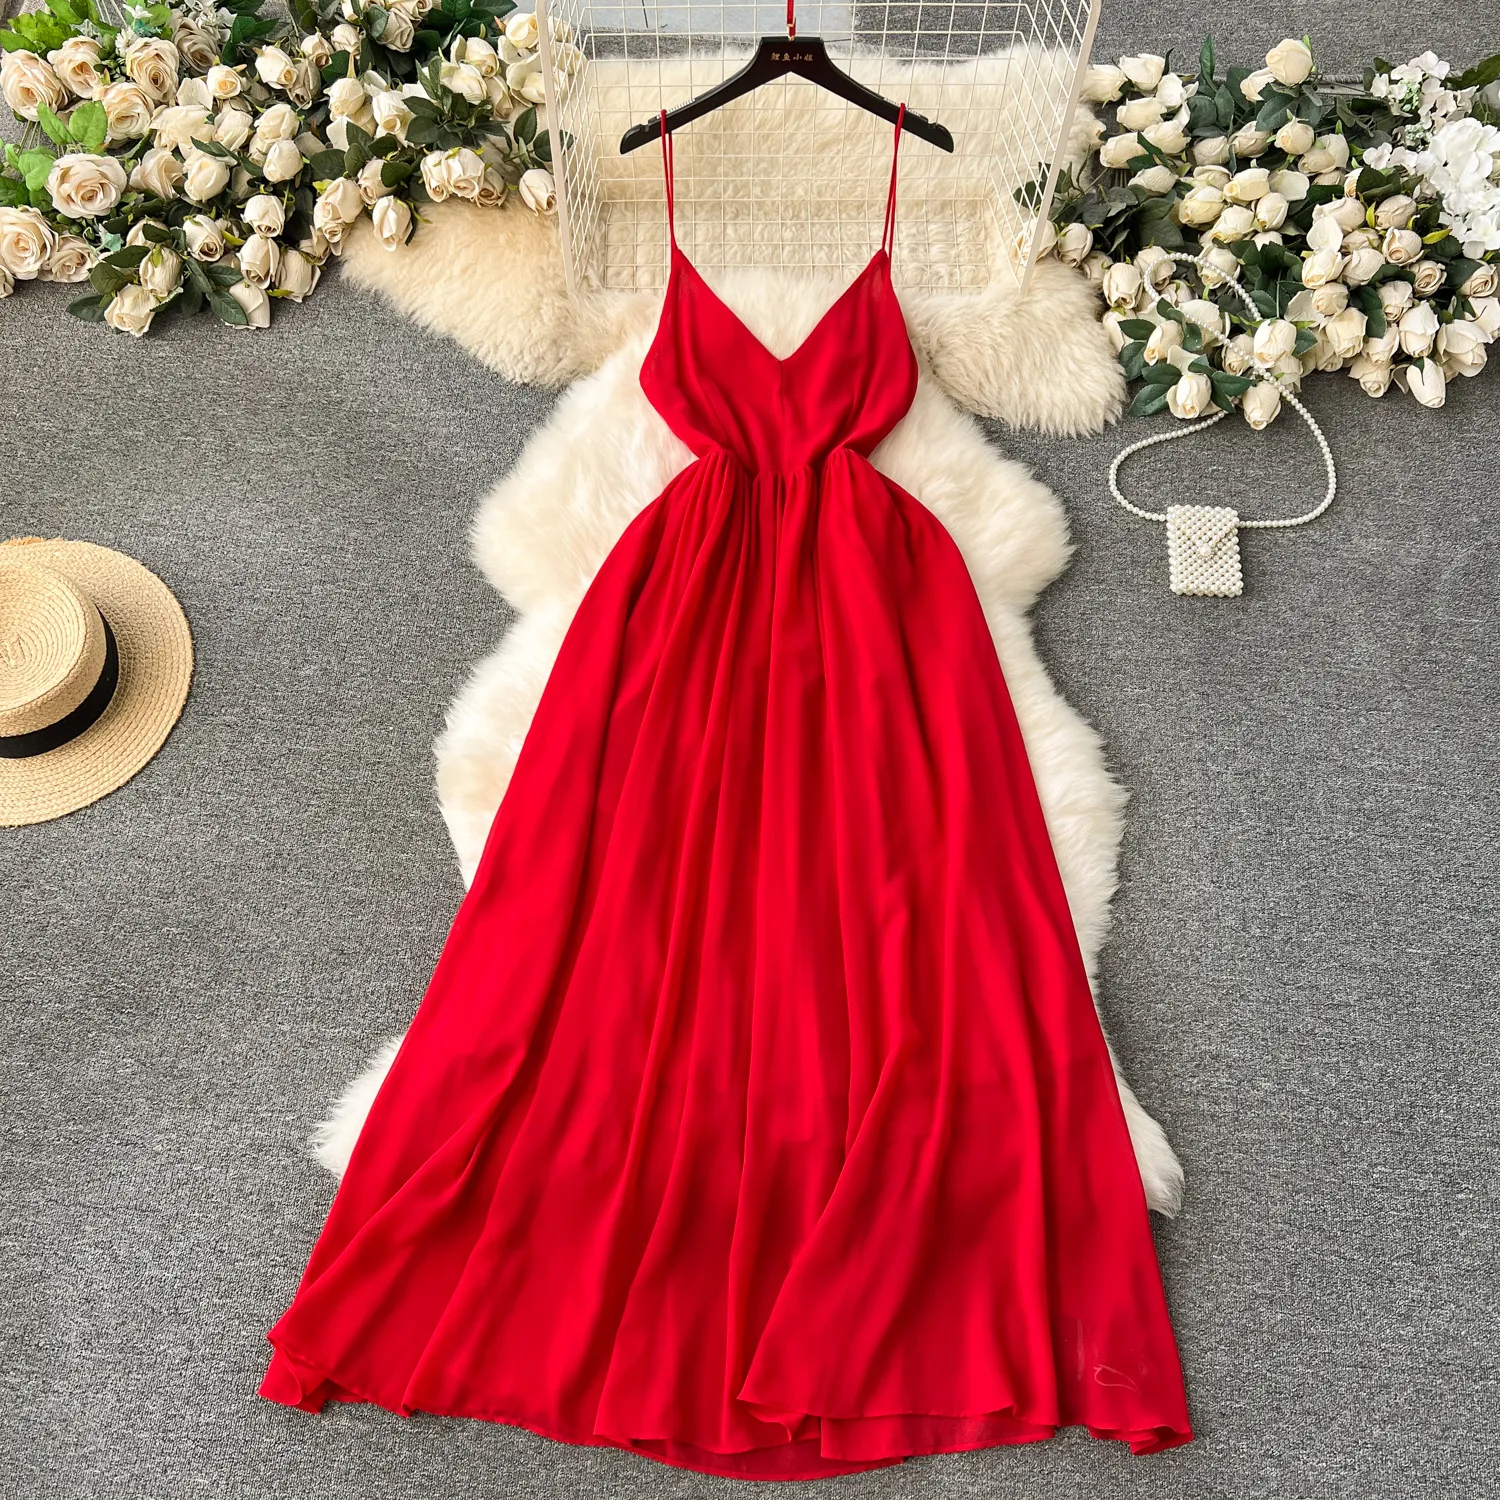 Travel photo vacation dress with heartfelt hollowed out backless straps for a slimming look V-neck strap chiffon long skirt